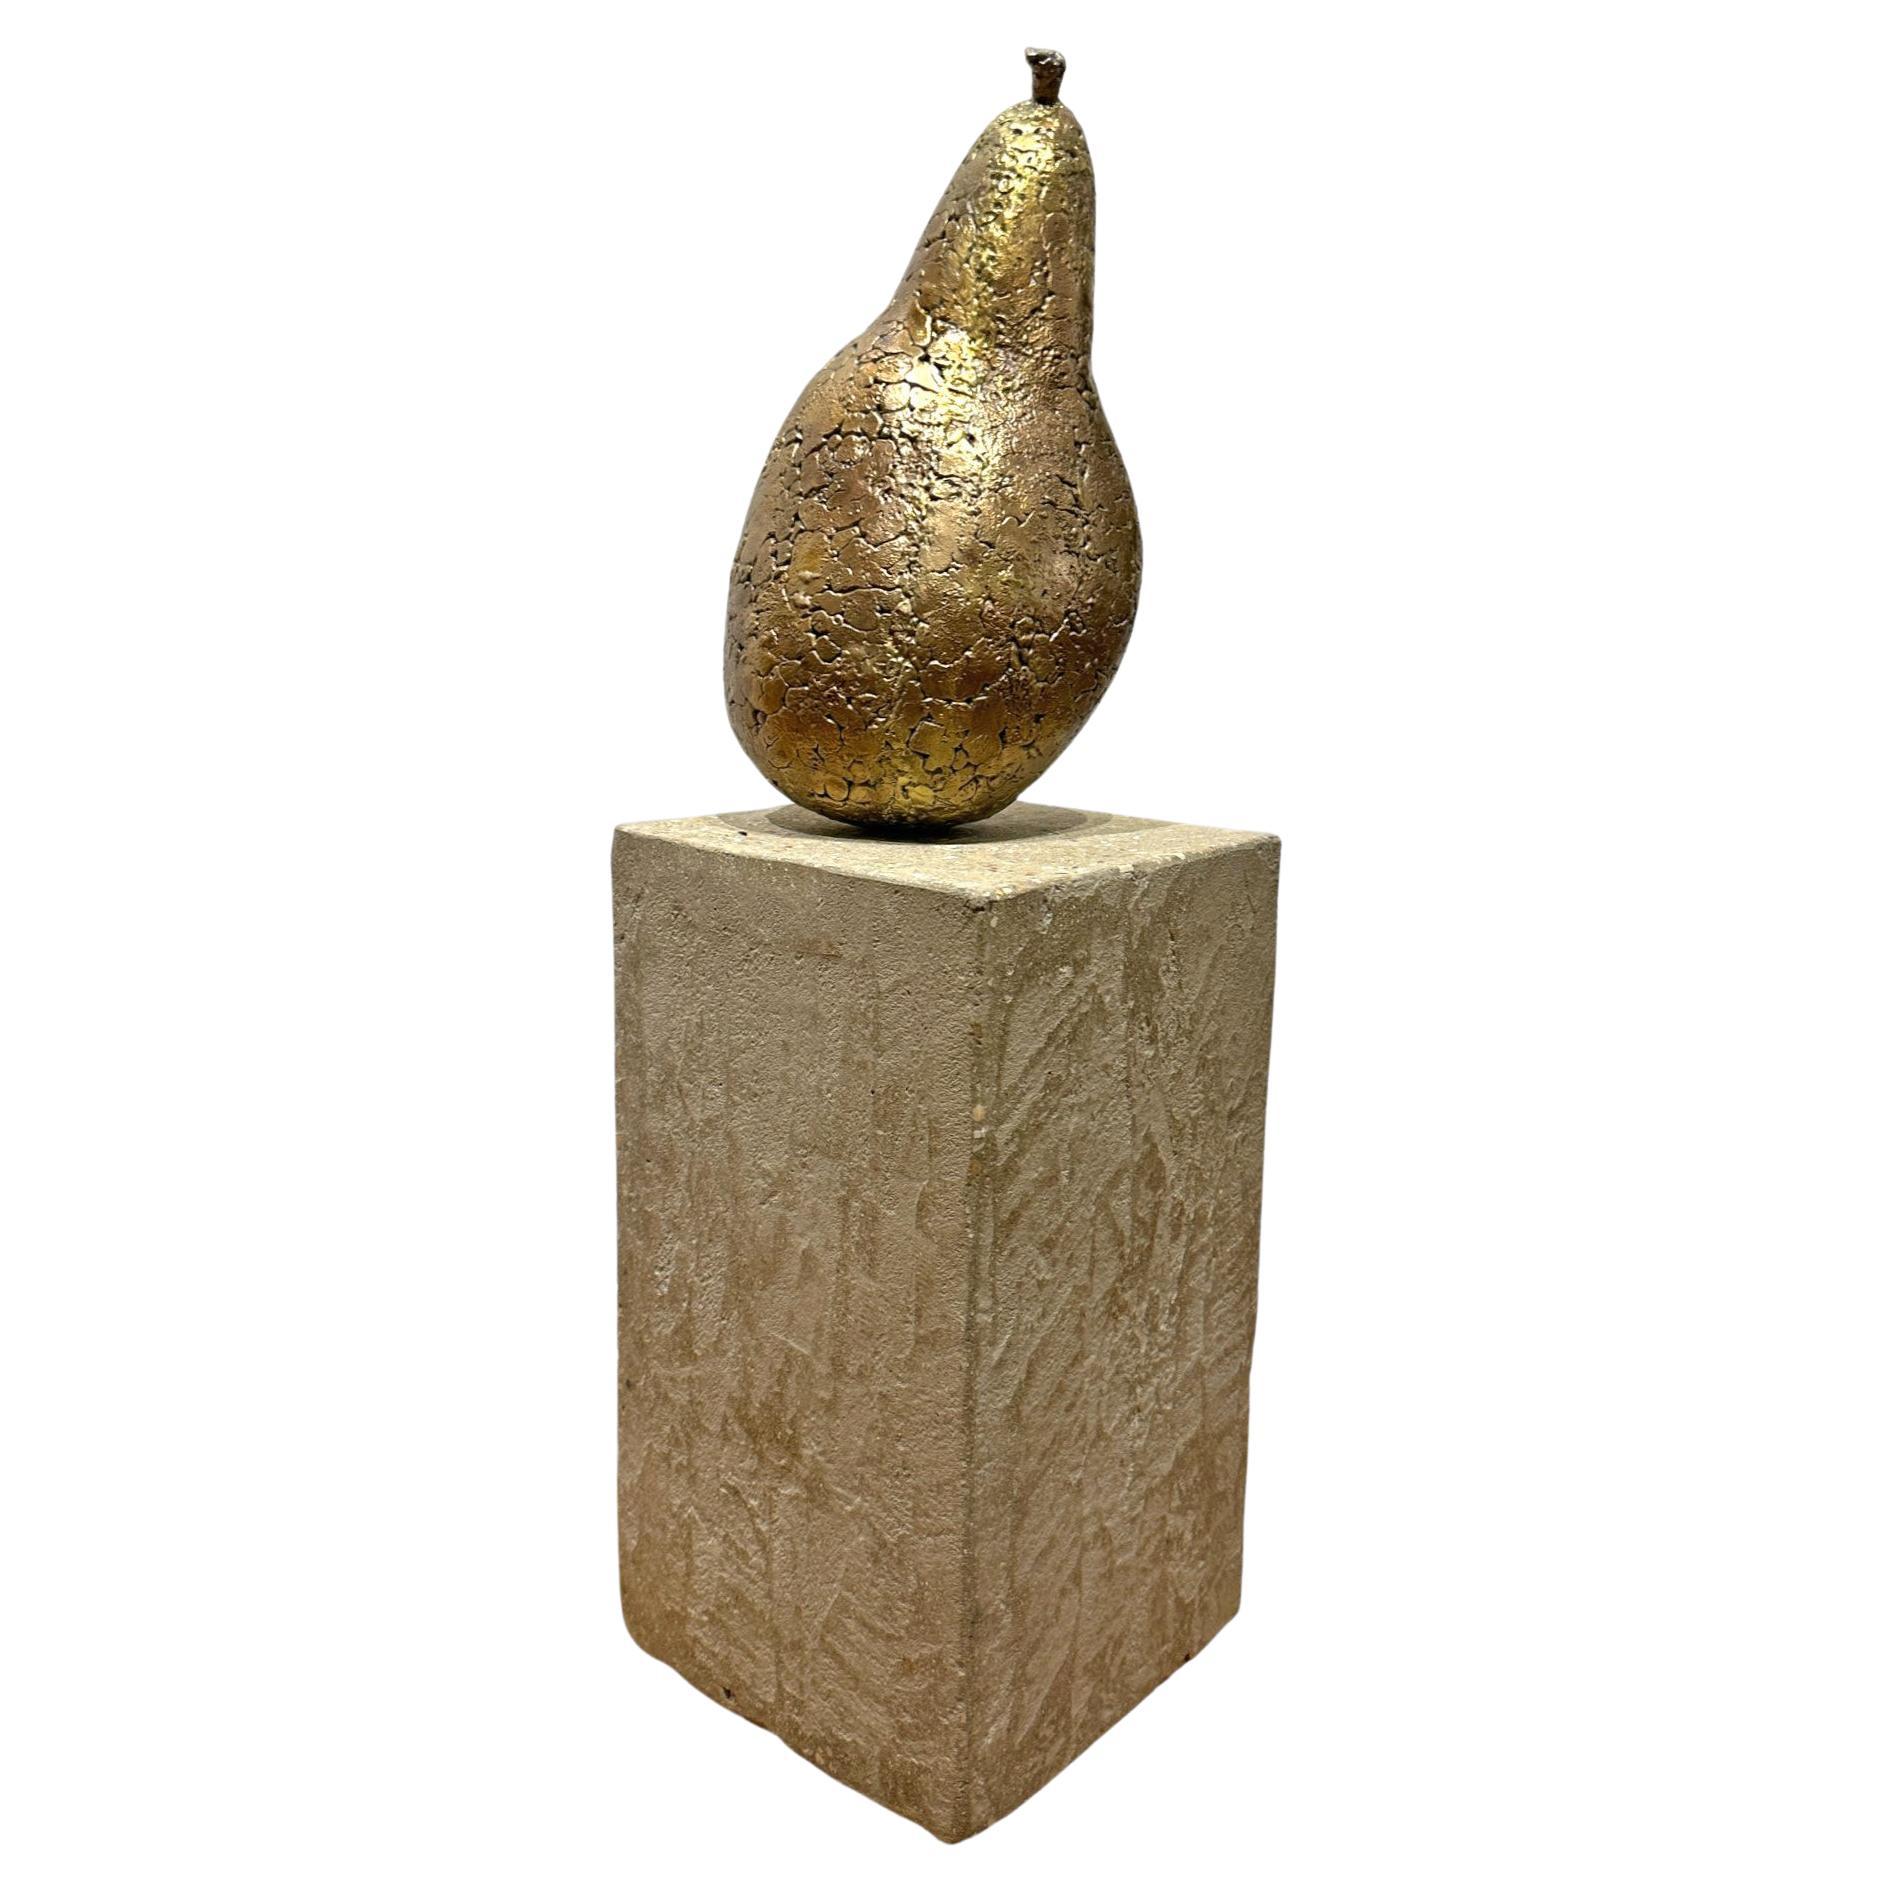 An oversized bronze pear sits upon a concrete base in Mary Block's unique work entitled Autumn Pear. This one of a kind bronze sculpture is perfect in its imperfect shape as only nature can produce. The surface of the bronze is a smoothed mosaic of